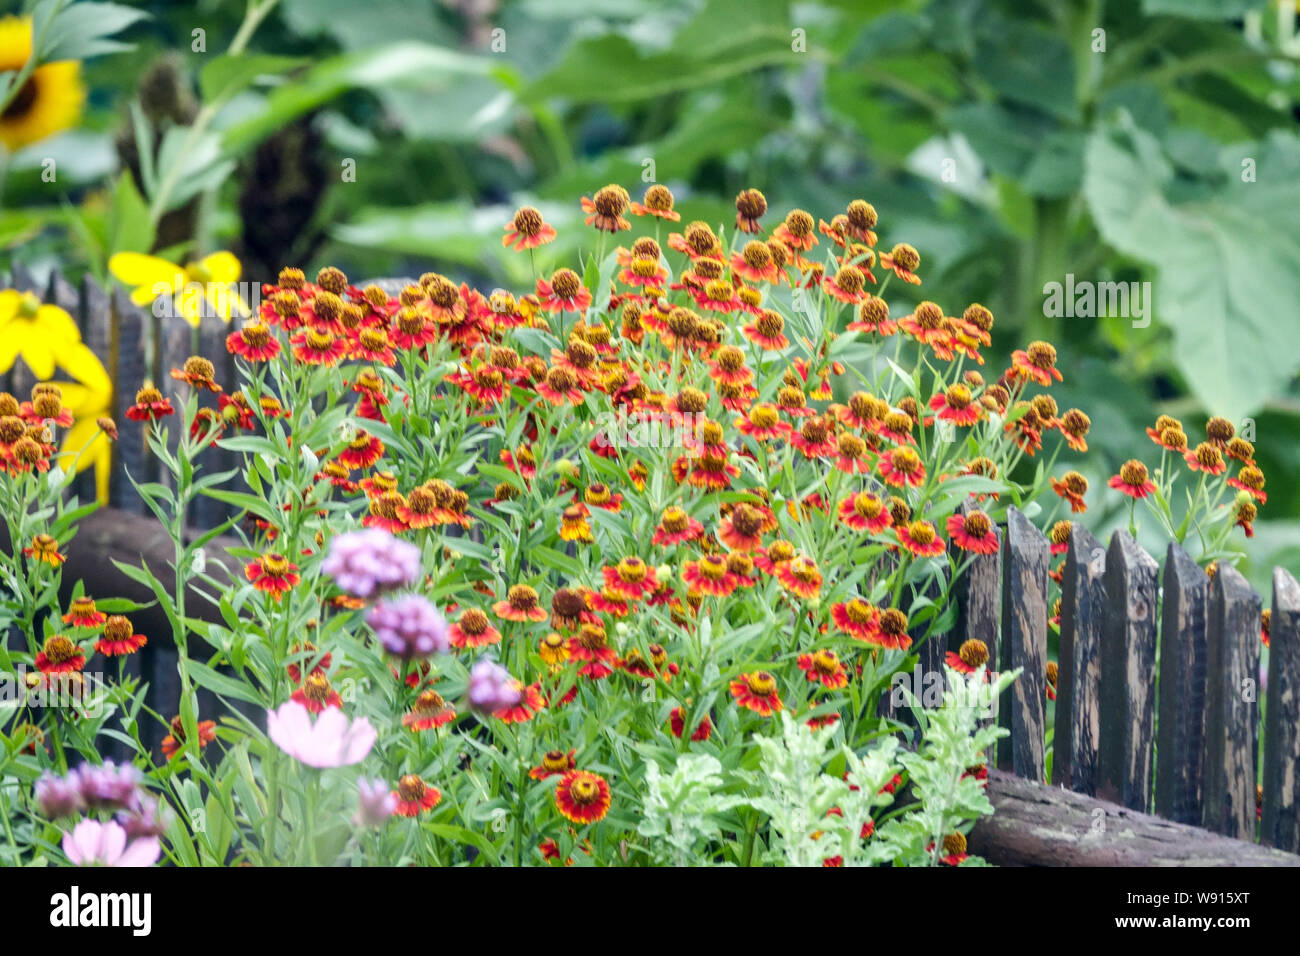 Colorful Rural Country Cottage Garden flowers Border Wooden fence Orange Helenium August Garden fence Colourful garden Flowers Flowering Mixed Stock Photo